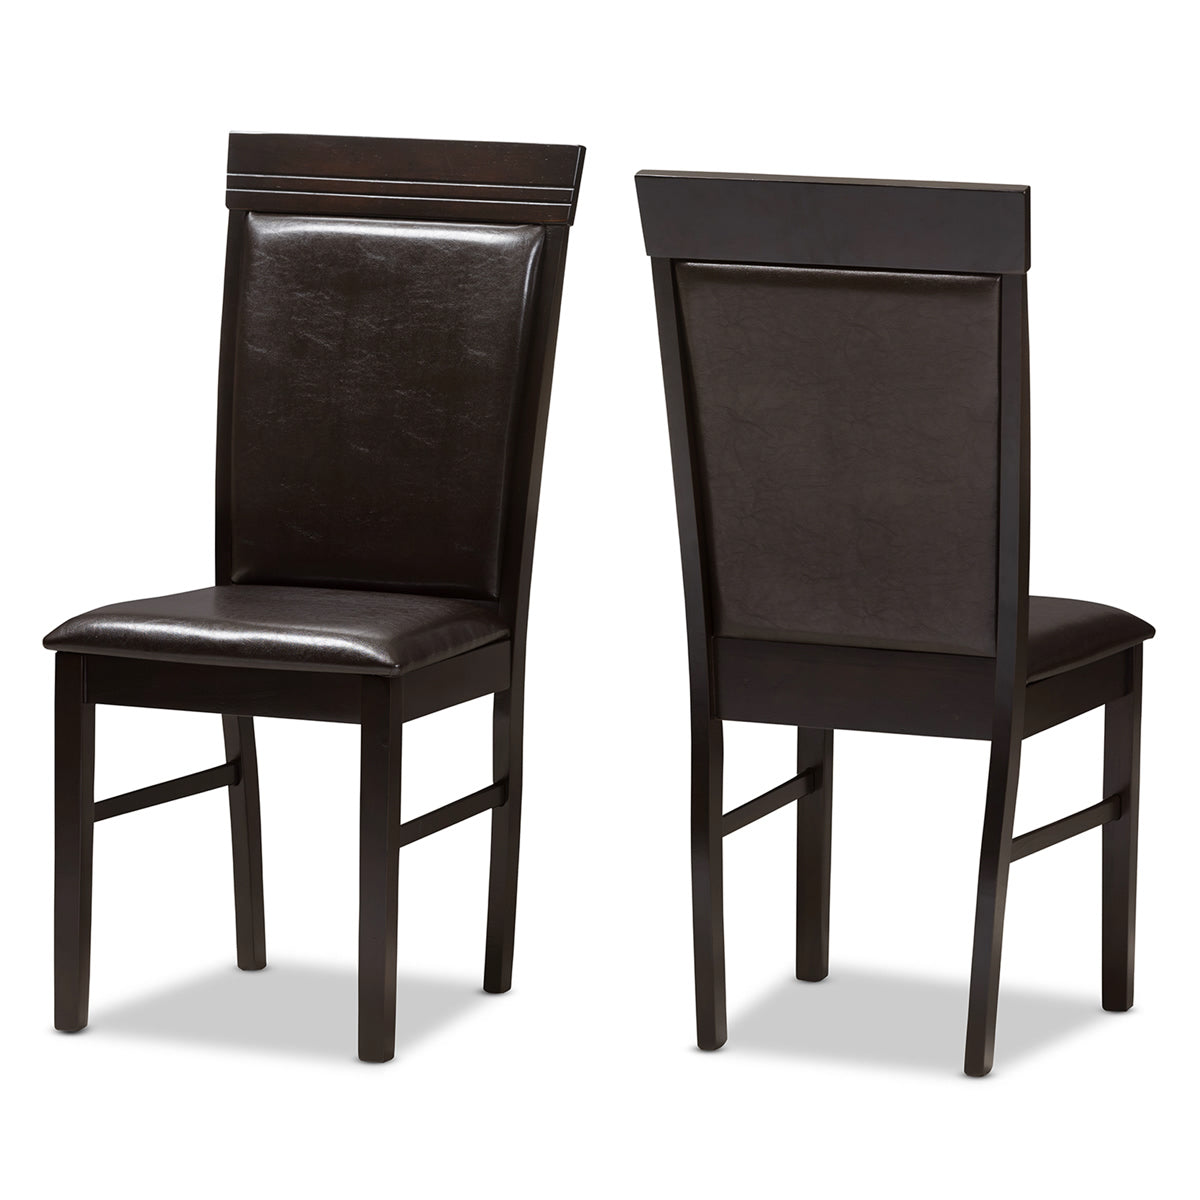 Baxton Studio Thea Modern and Contemporary Dark Brown Faux Leather Upholstered Dining Chair (Set of 2) Baxton Studio-dining chair-Minimal And Modern - 1